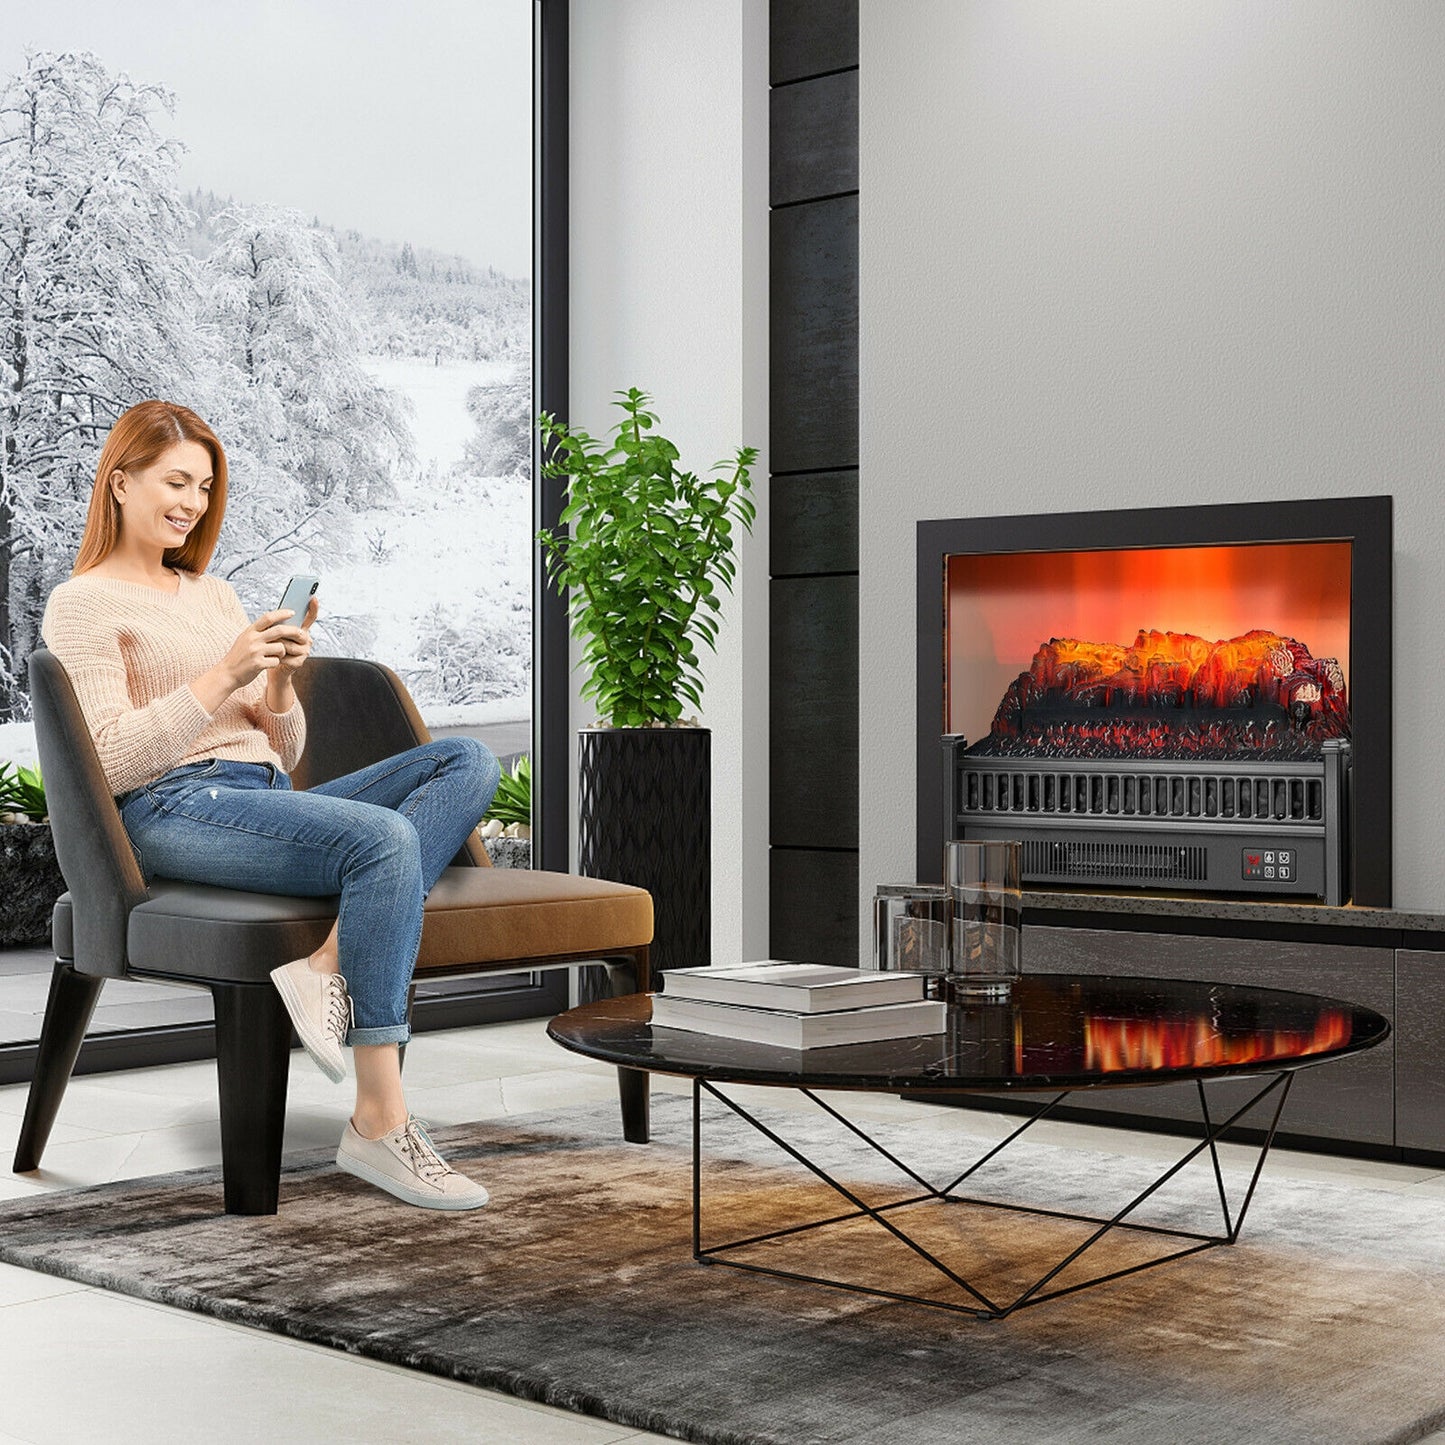 1400W Electric Fireplace Log Heater with Adjustable Flame Brightness-Black